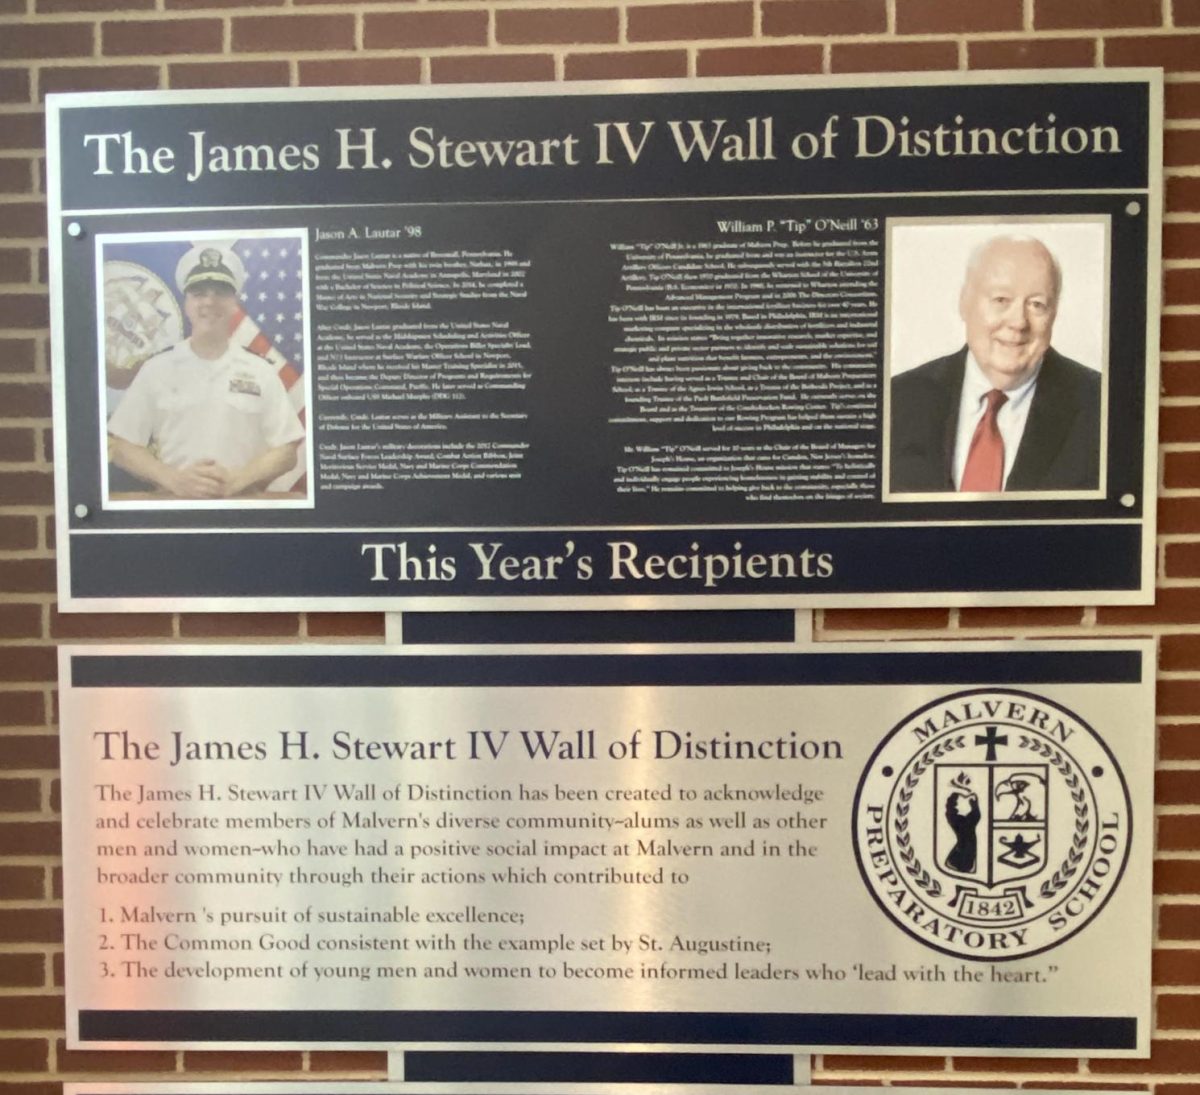 Newest Inductees to The Wall of Distinction: Two Servant Leaders